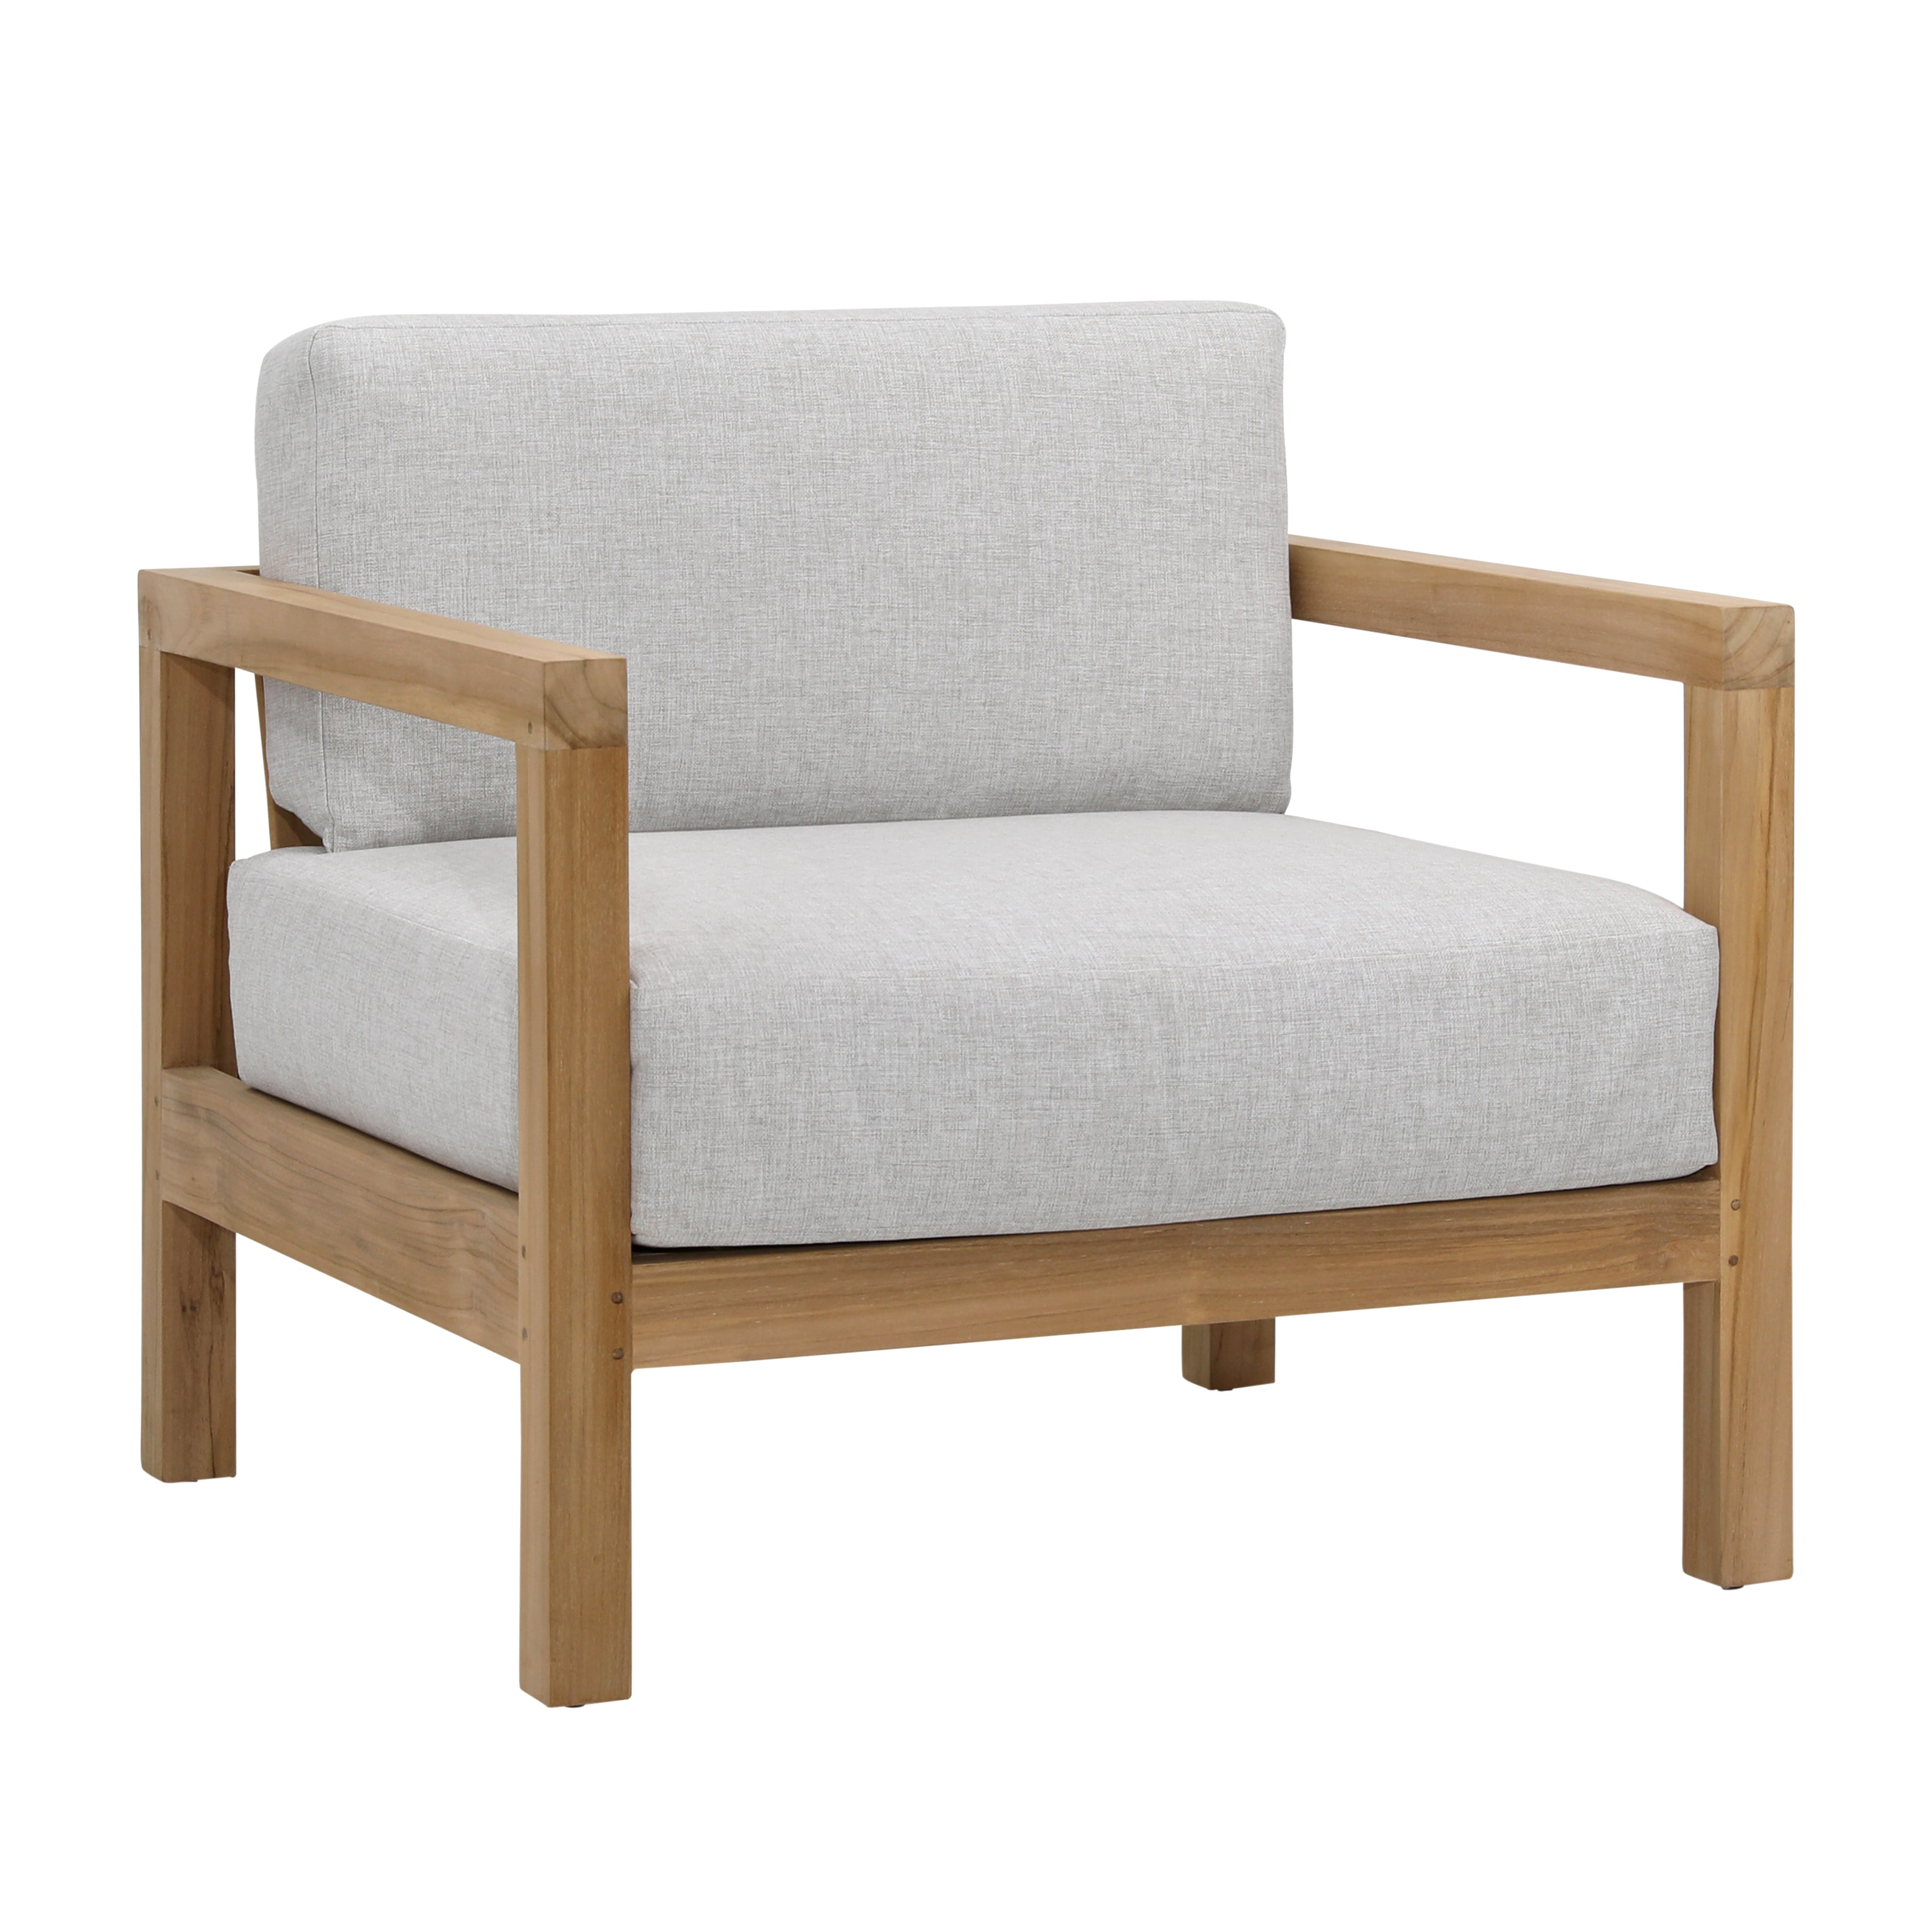 Boe Outdoor Sofa Chair - What A Room